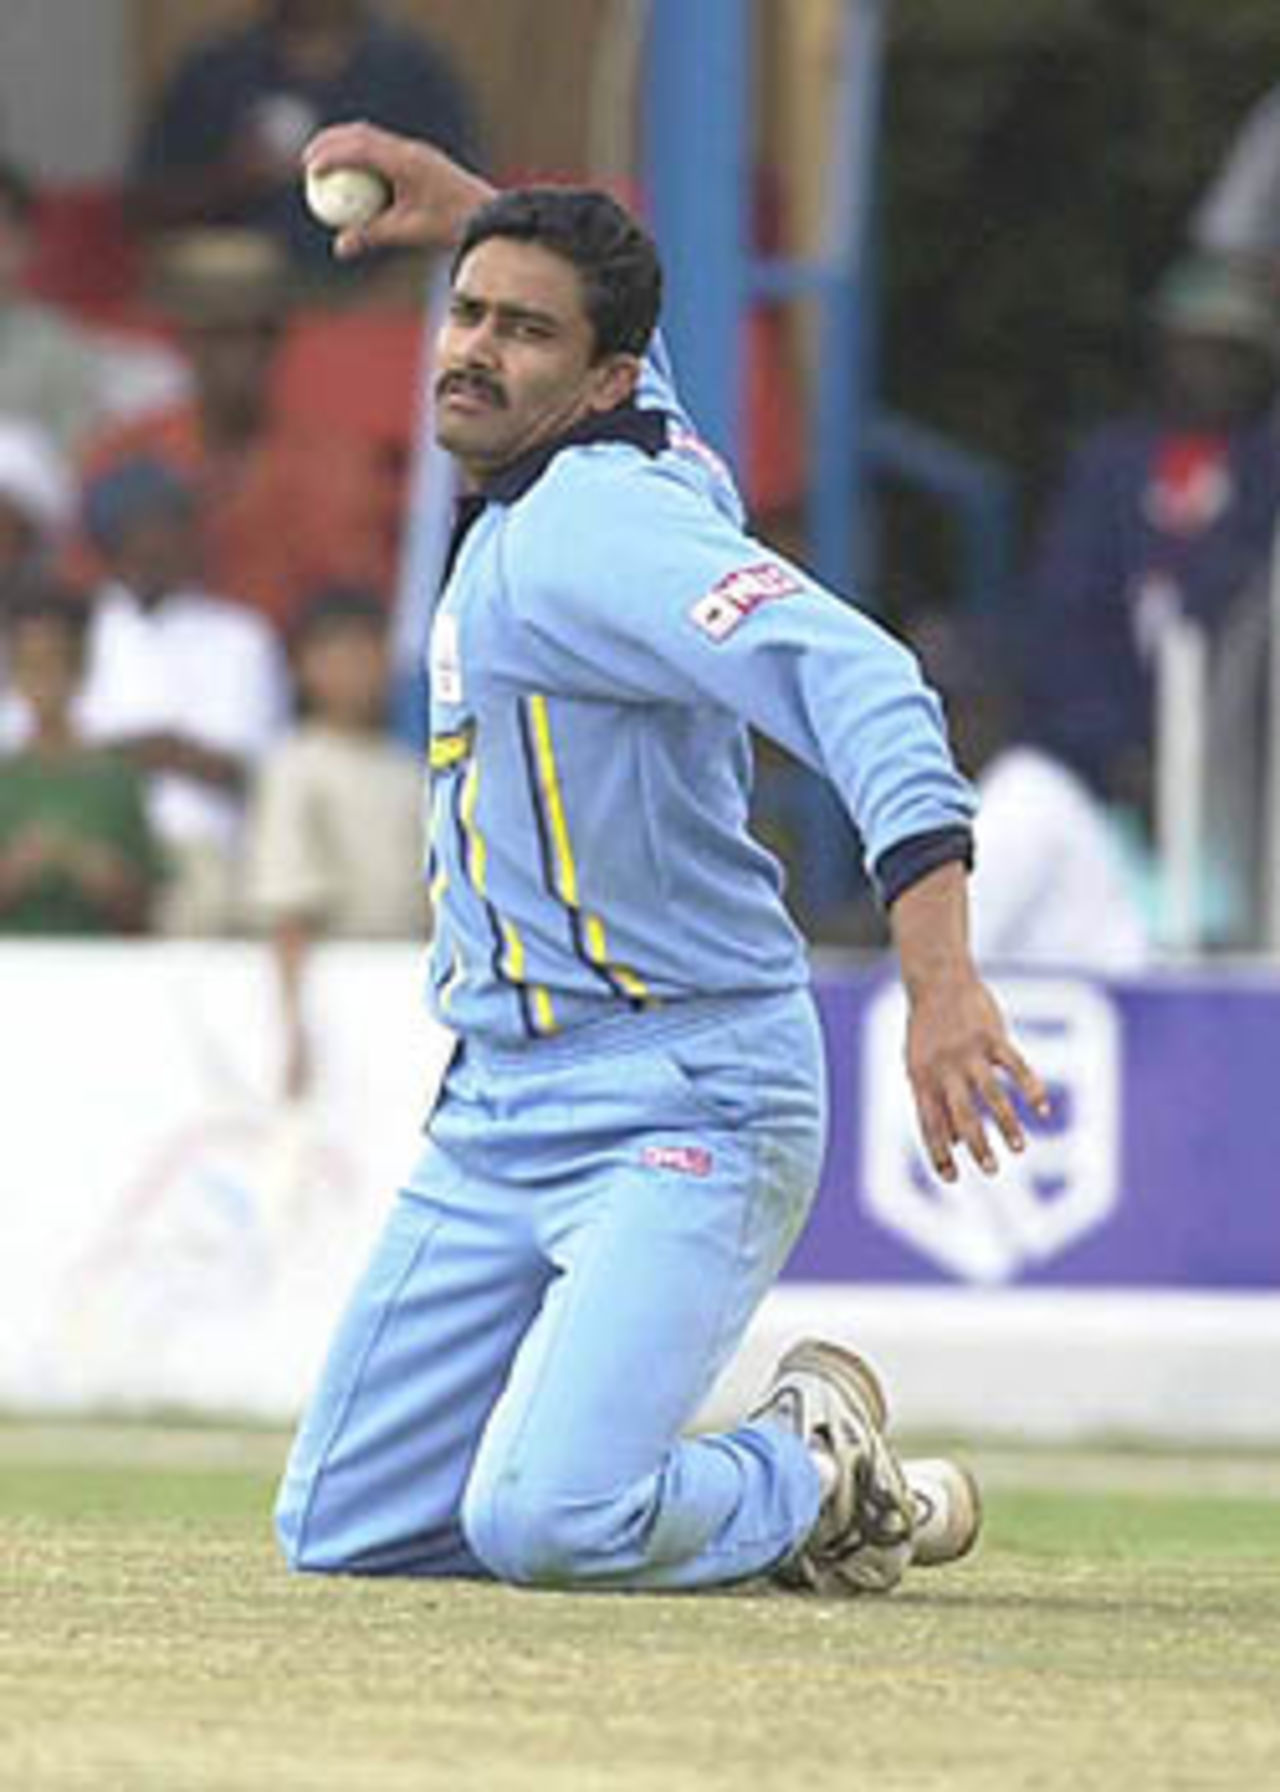 Kumble on the verge of throwing the ball after making a sliding stop, ICC KnockOut, 2000/01, Final, India v New Zealand, Gymkhana Club Ground, Nairobi, 15 October 2000.